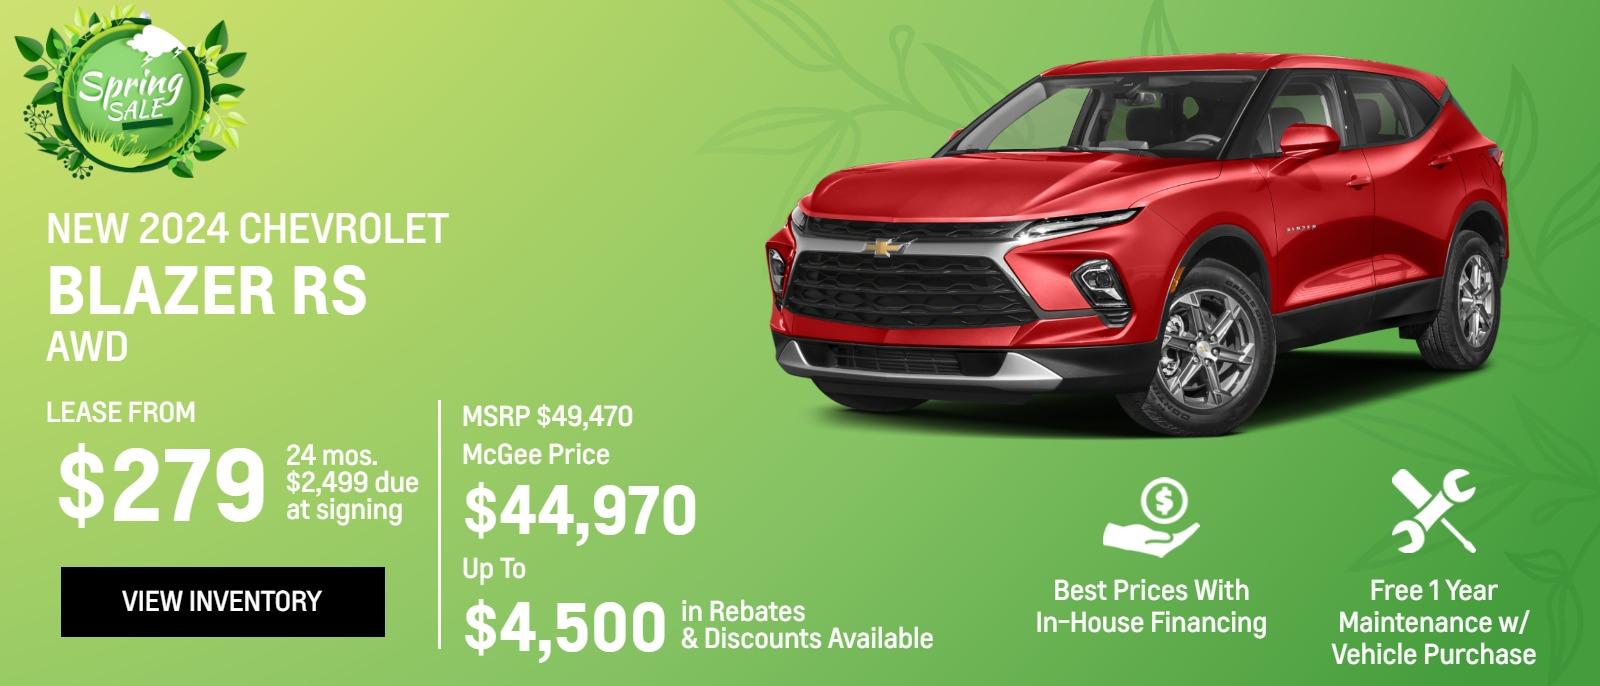 New 2024 Chevrolet
Blazer RS AWD

Lease From
$279
24 mos.
$2,499 due
at signing
49,470
McGee Price
$44,970

Up To
$4,500 (bold larger text)
in Rebates
&Discounts Available

Best Prices With In-House Financing

Free 1 Year Maintenance
w/ Vehicle Purchase